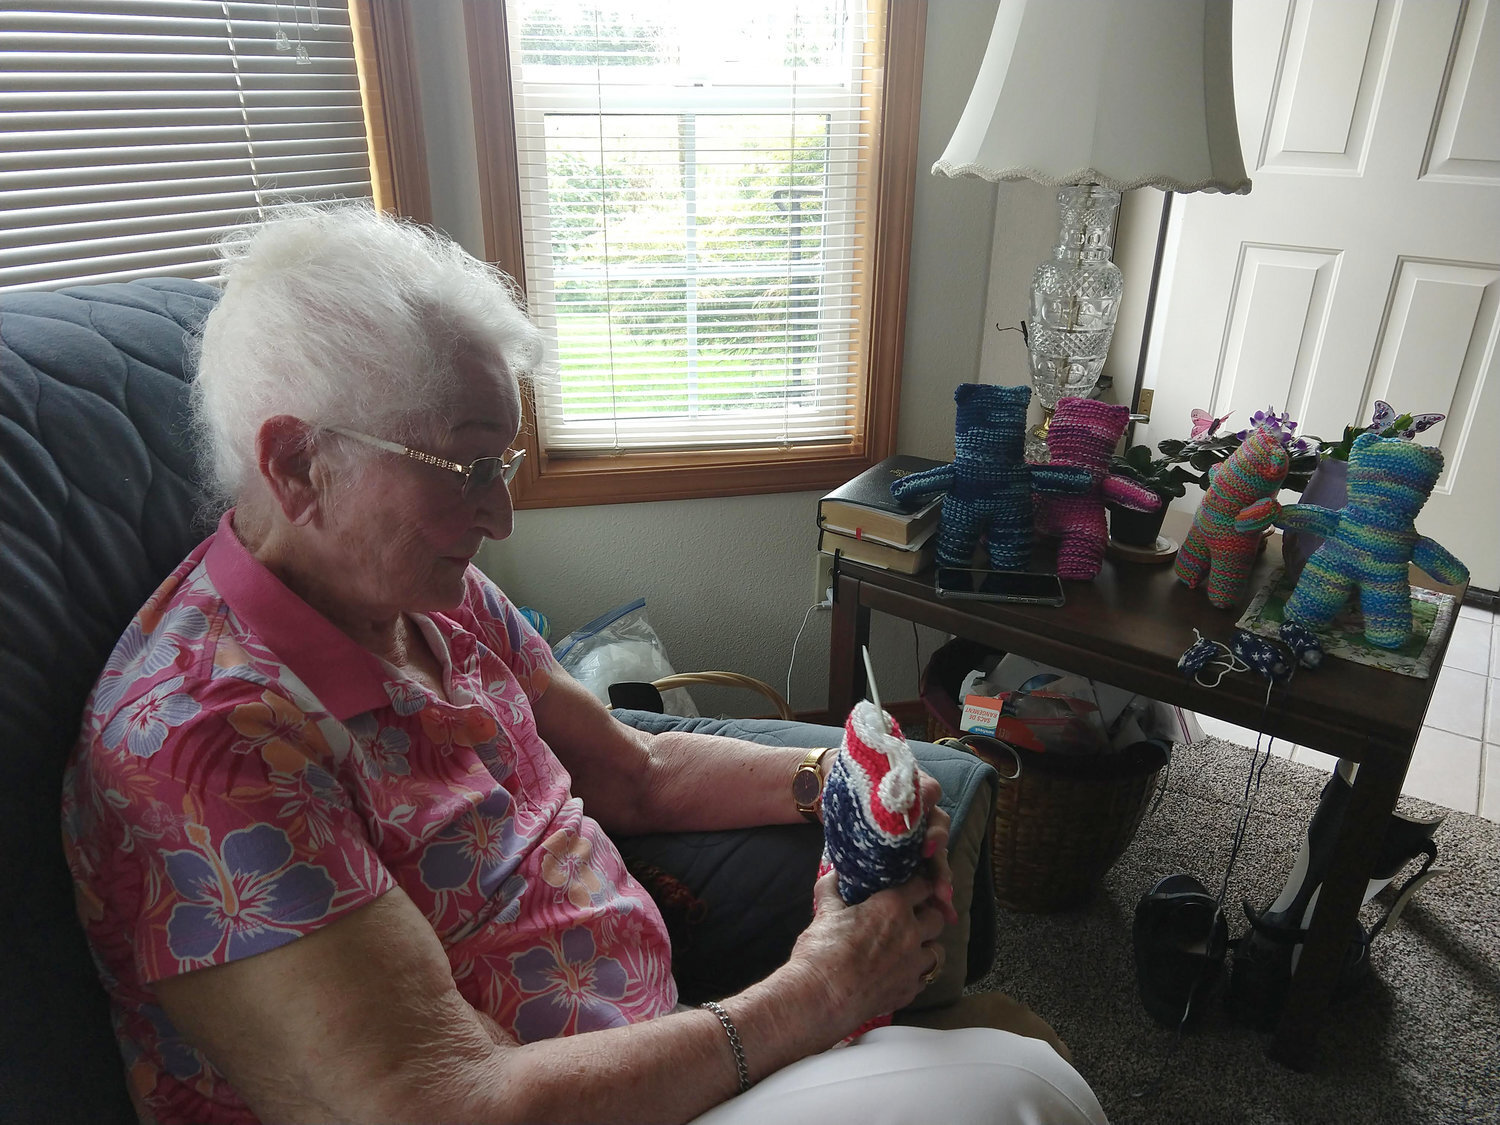 Shirley (French) Nelson, who turned 100 in July, holds a “prayer bear” that she knitted in this recent photo.